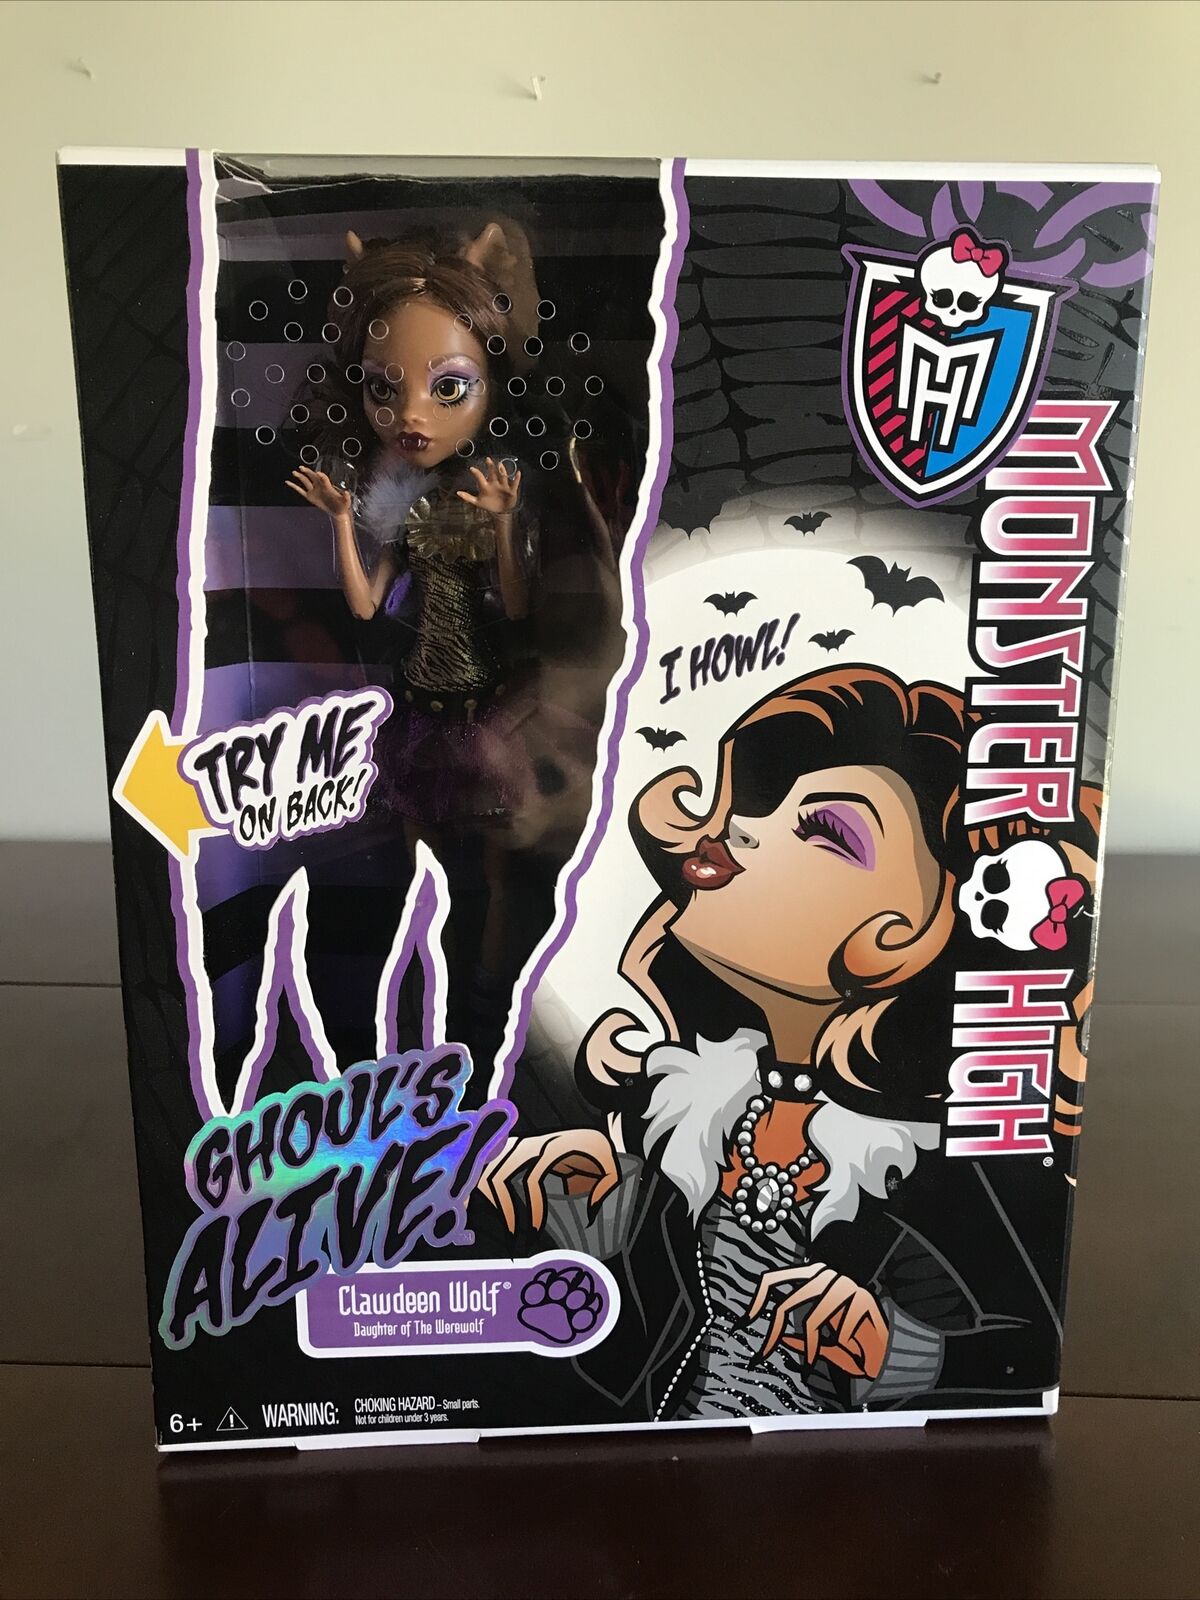 2012 Monster High “Ghouls Alive